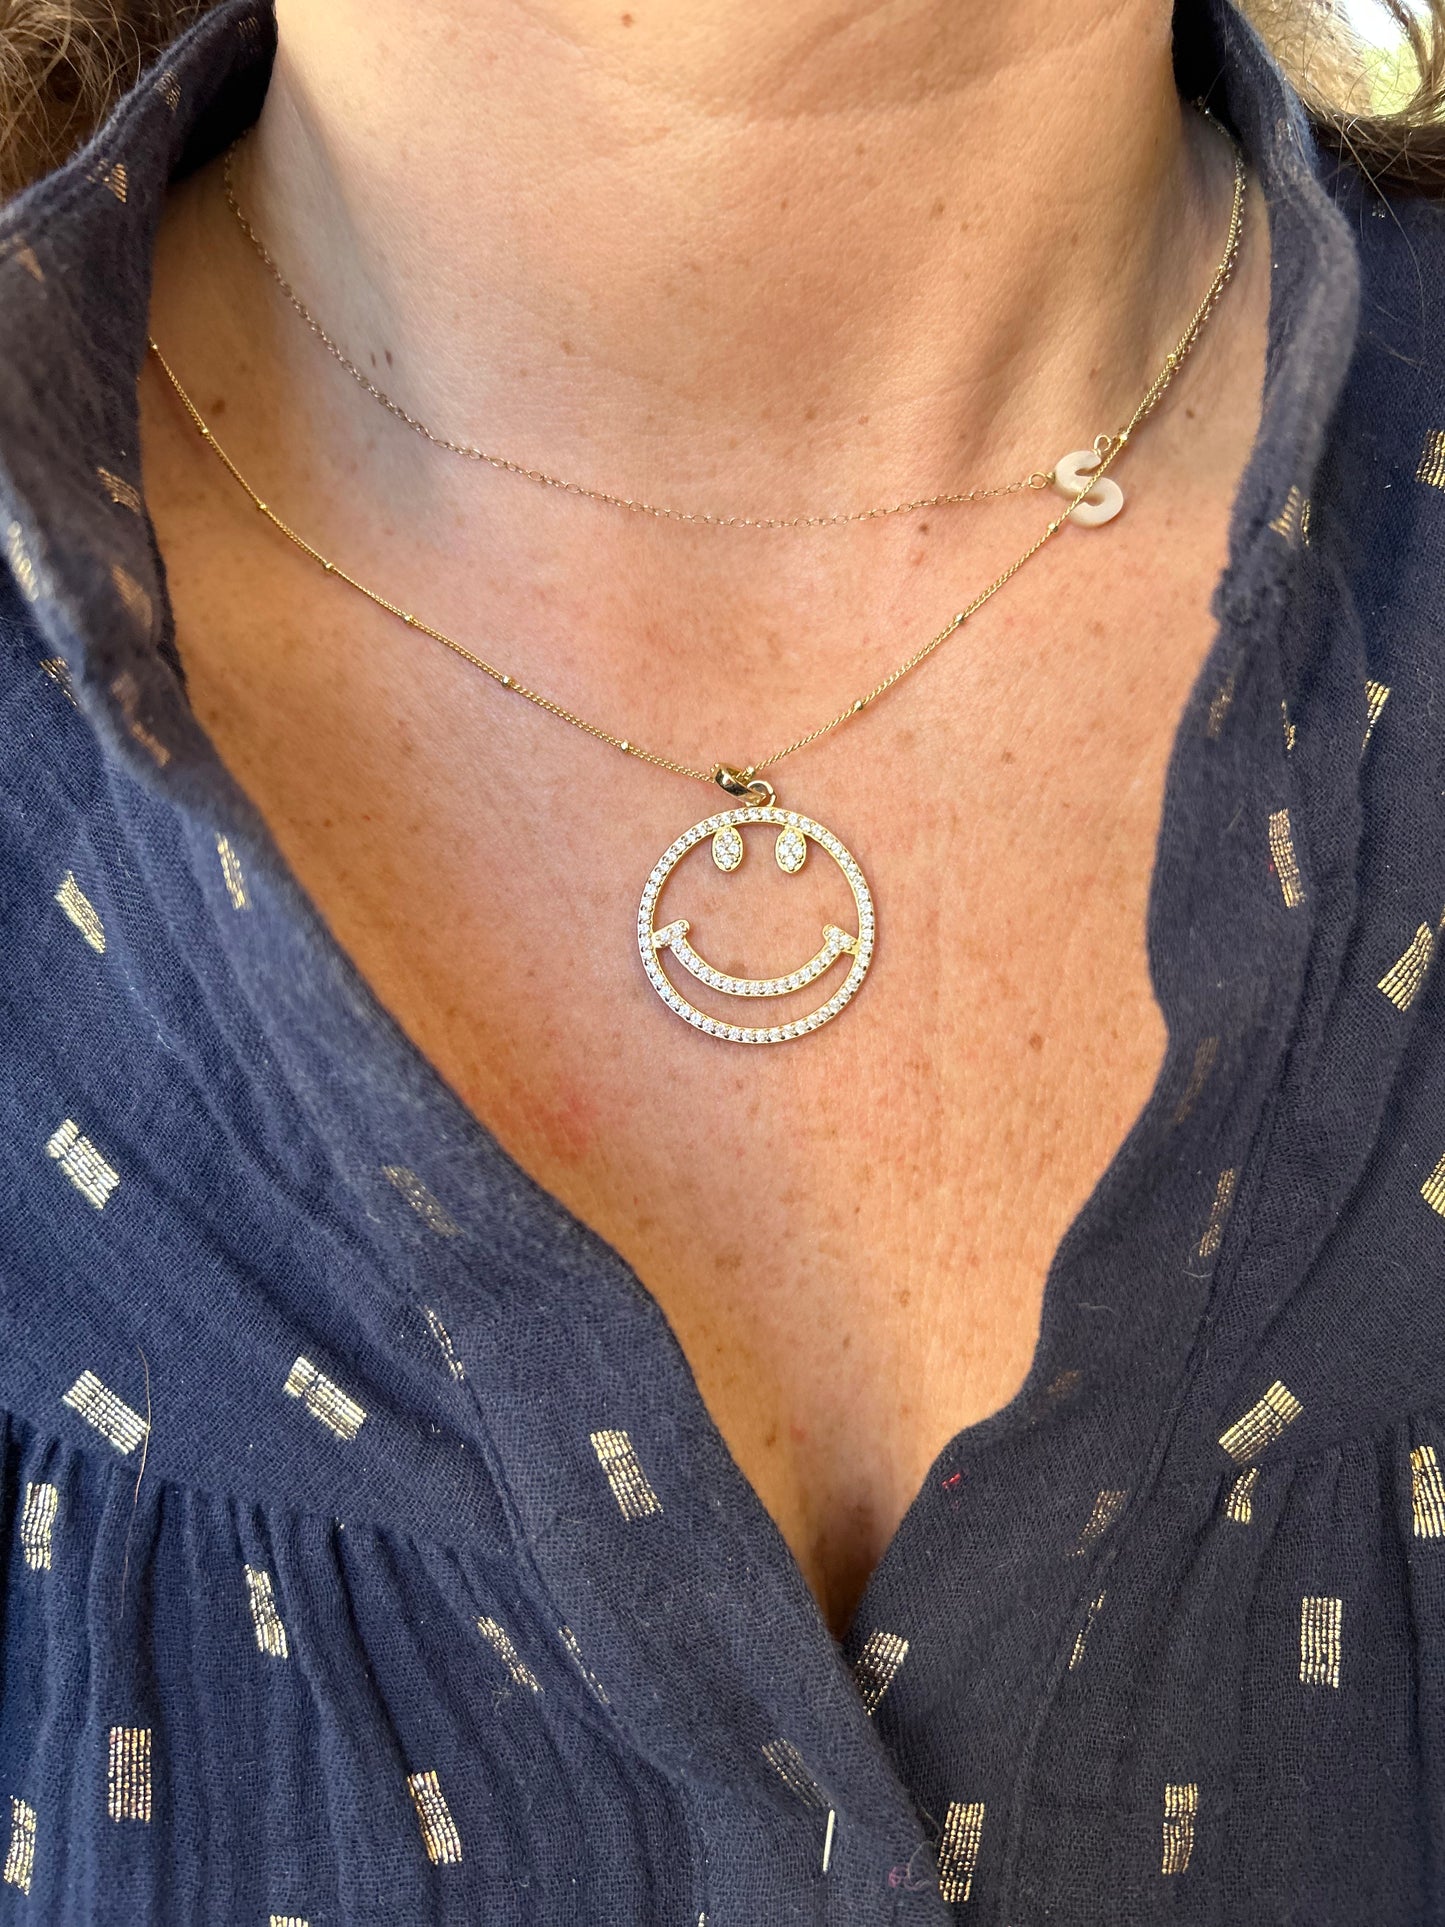 Sparkly smiley face necklace